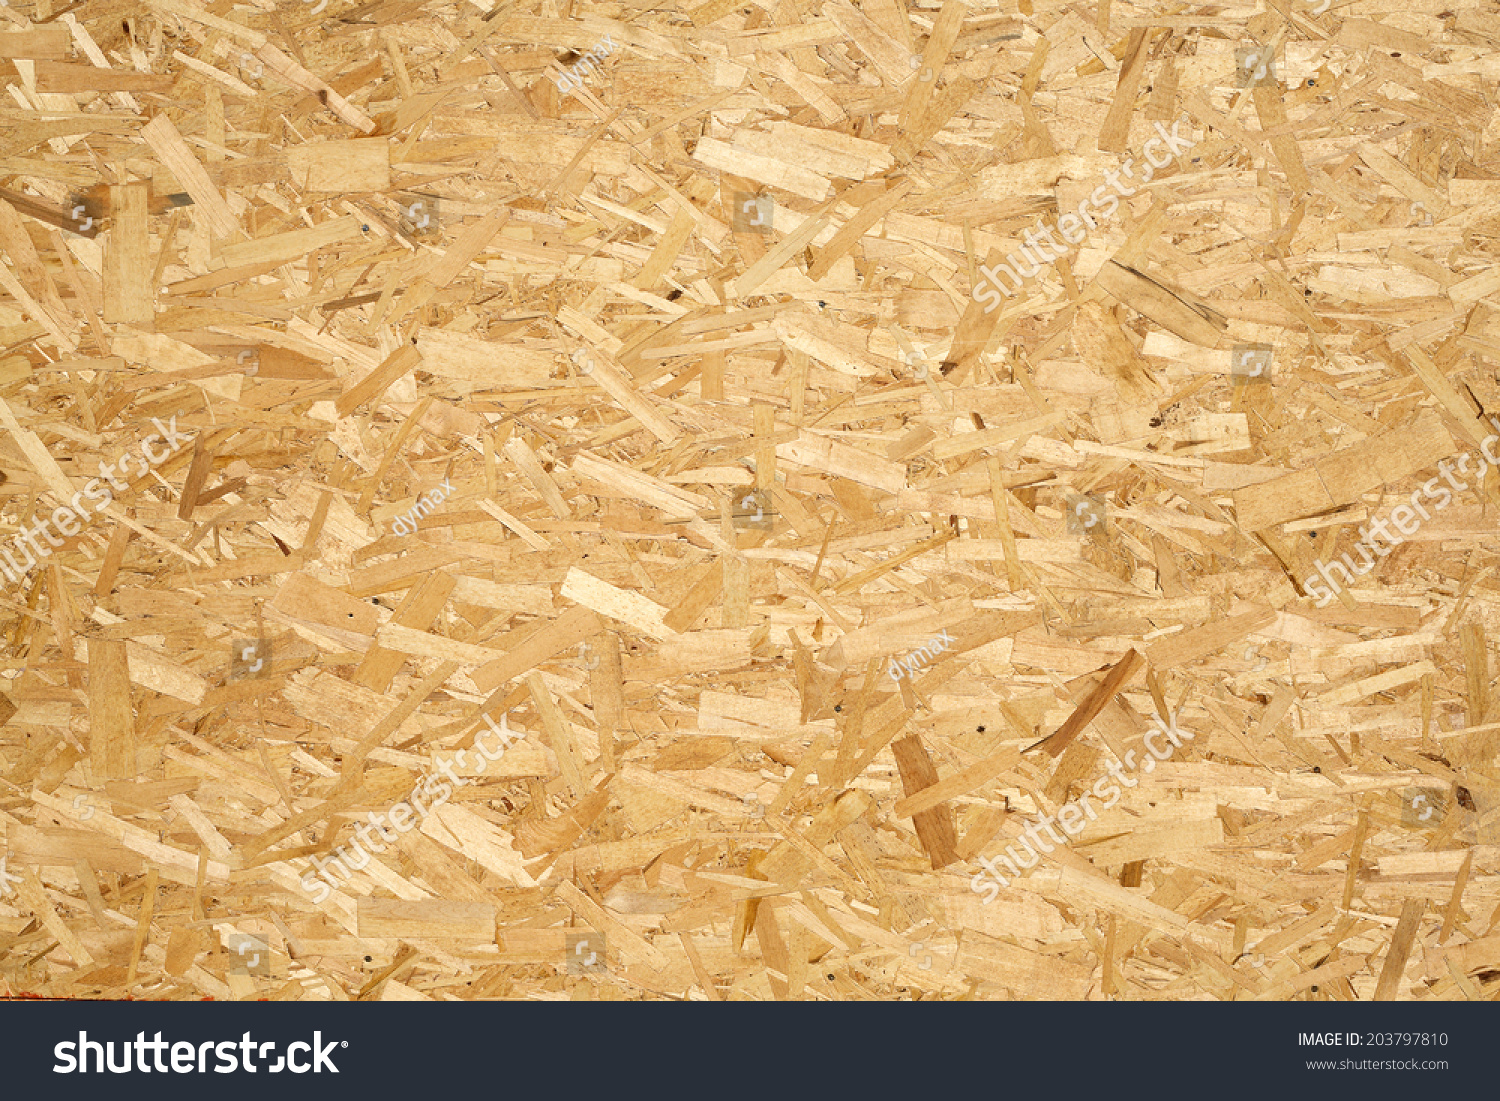 Oriented Strand Board. Chipboard building material. OSB wooden panel made of pressed sandy brown wood shavings as background closeup #203797810